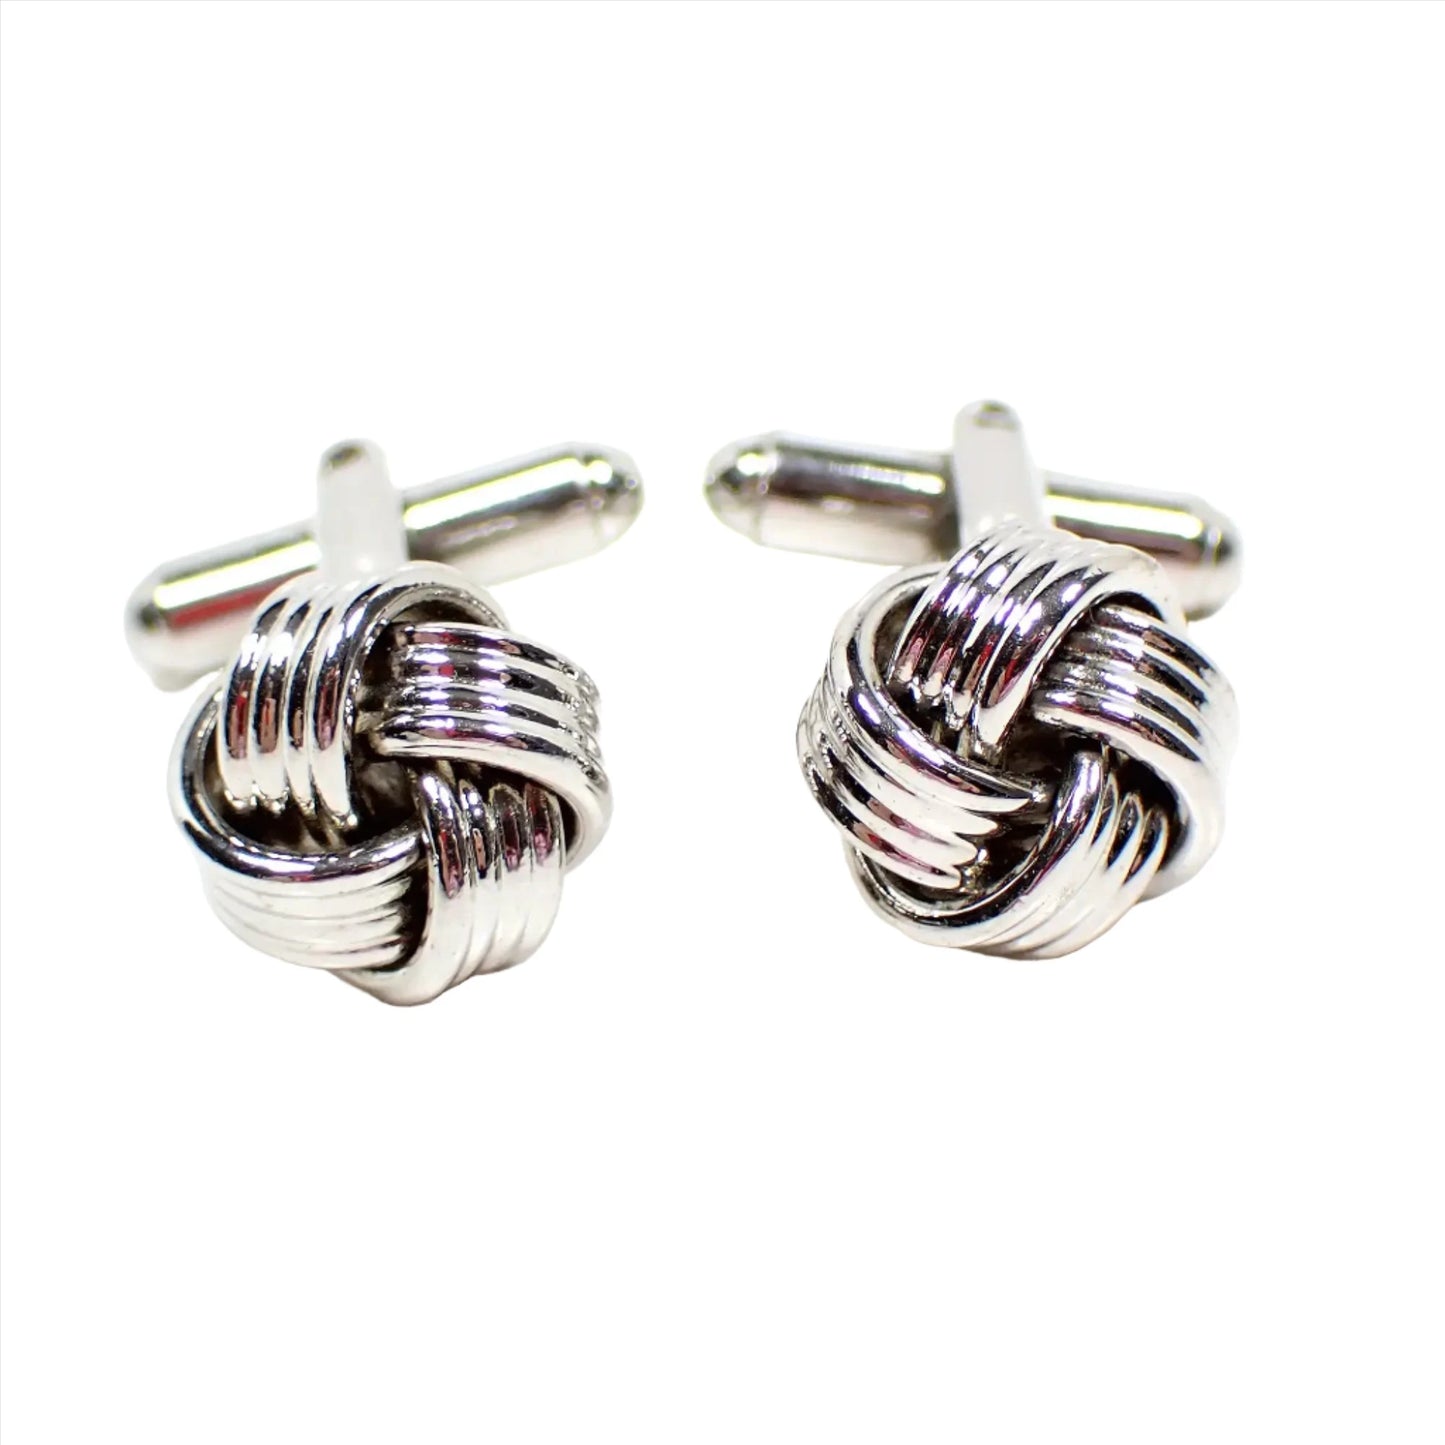 Front view of the retro vintage knot cufflinks. The metal is silver tone in color. The knots are woven with silver color metal that has textured stripes. 